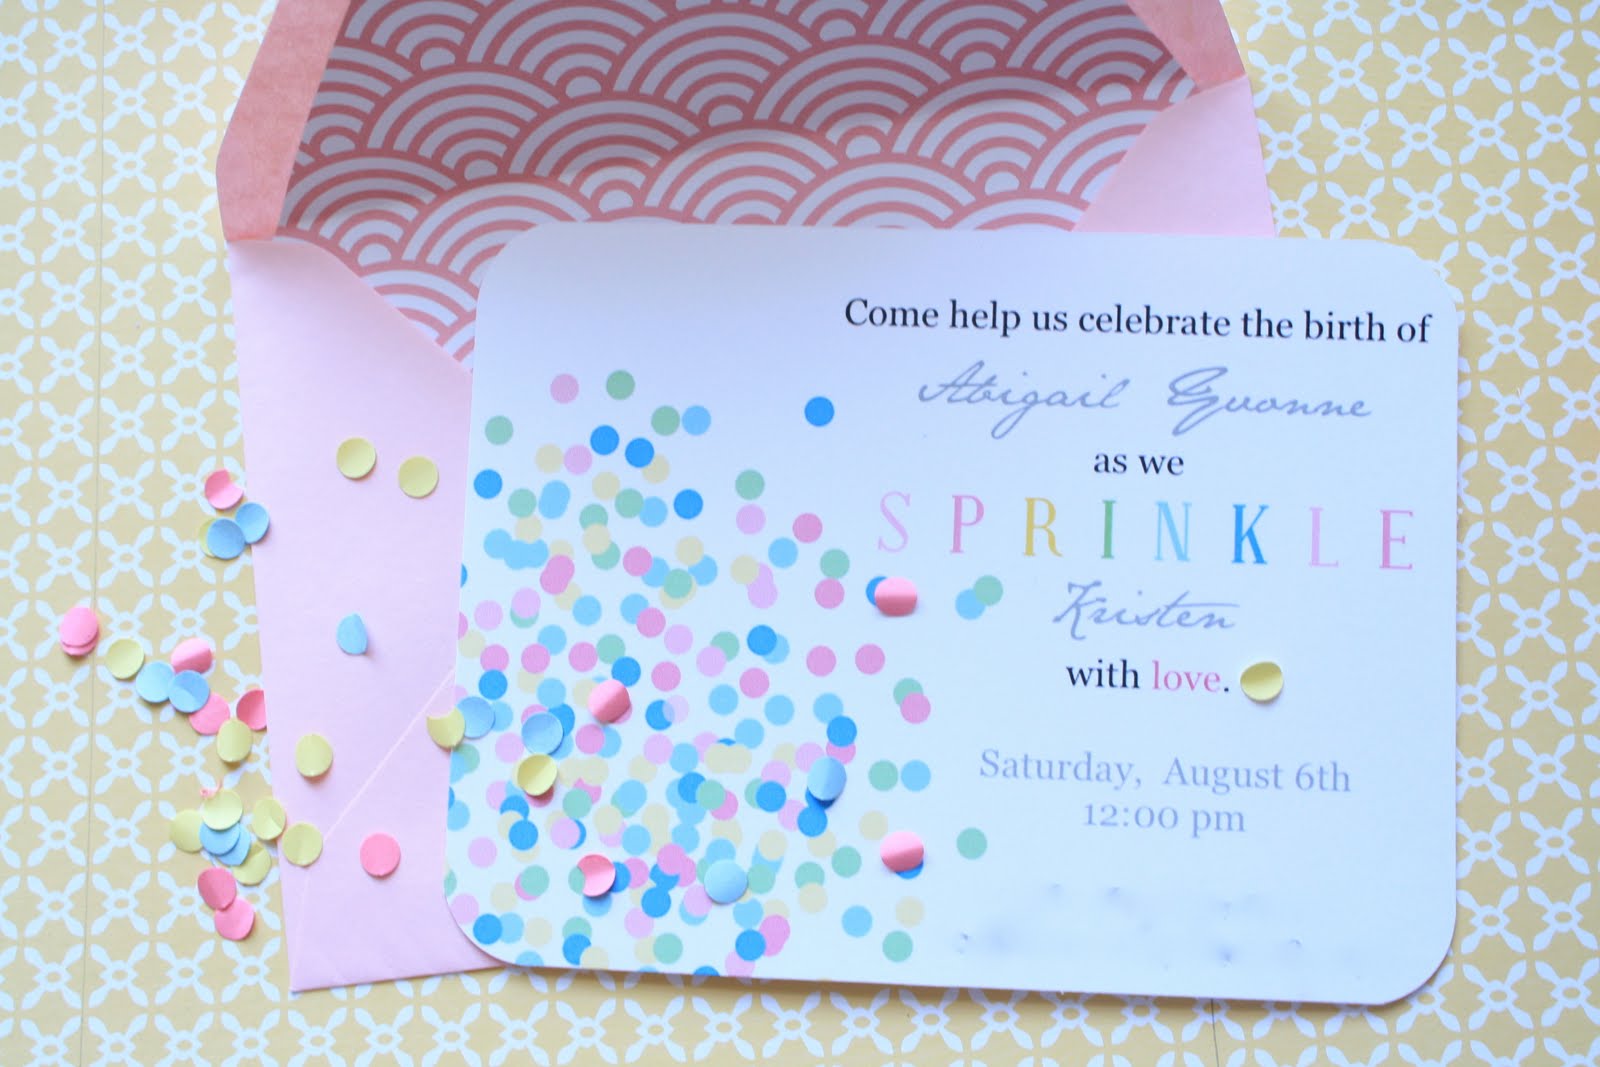 How to Make a Baby Shower Invitations4